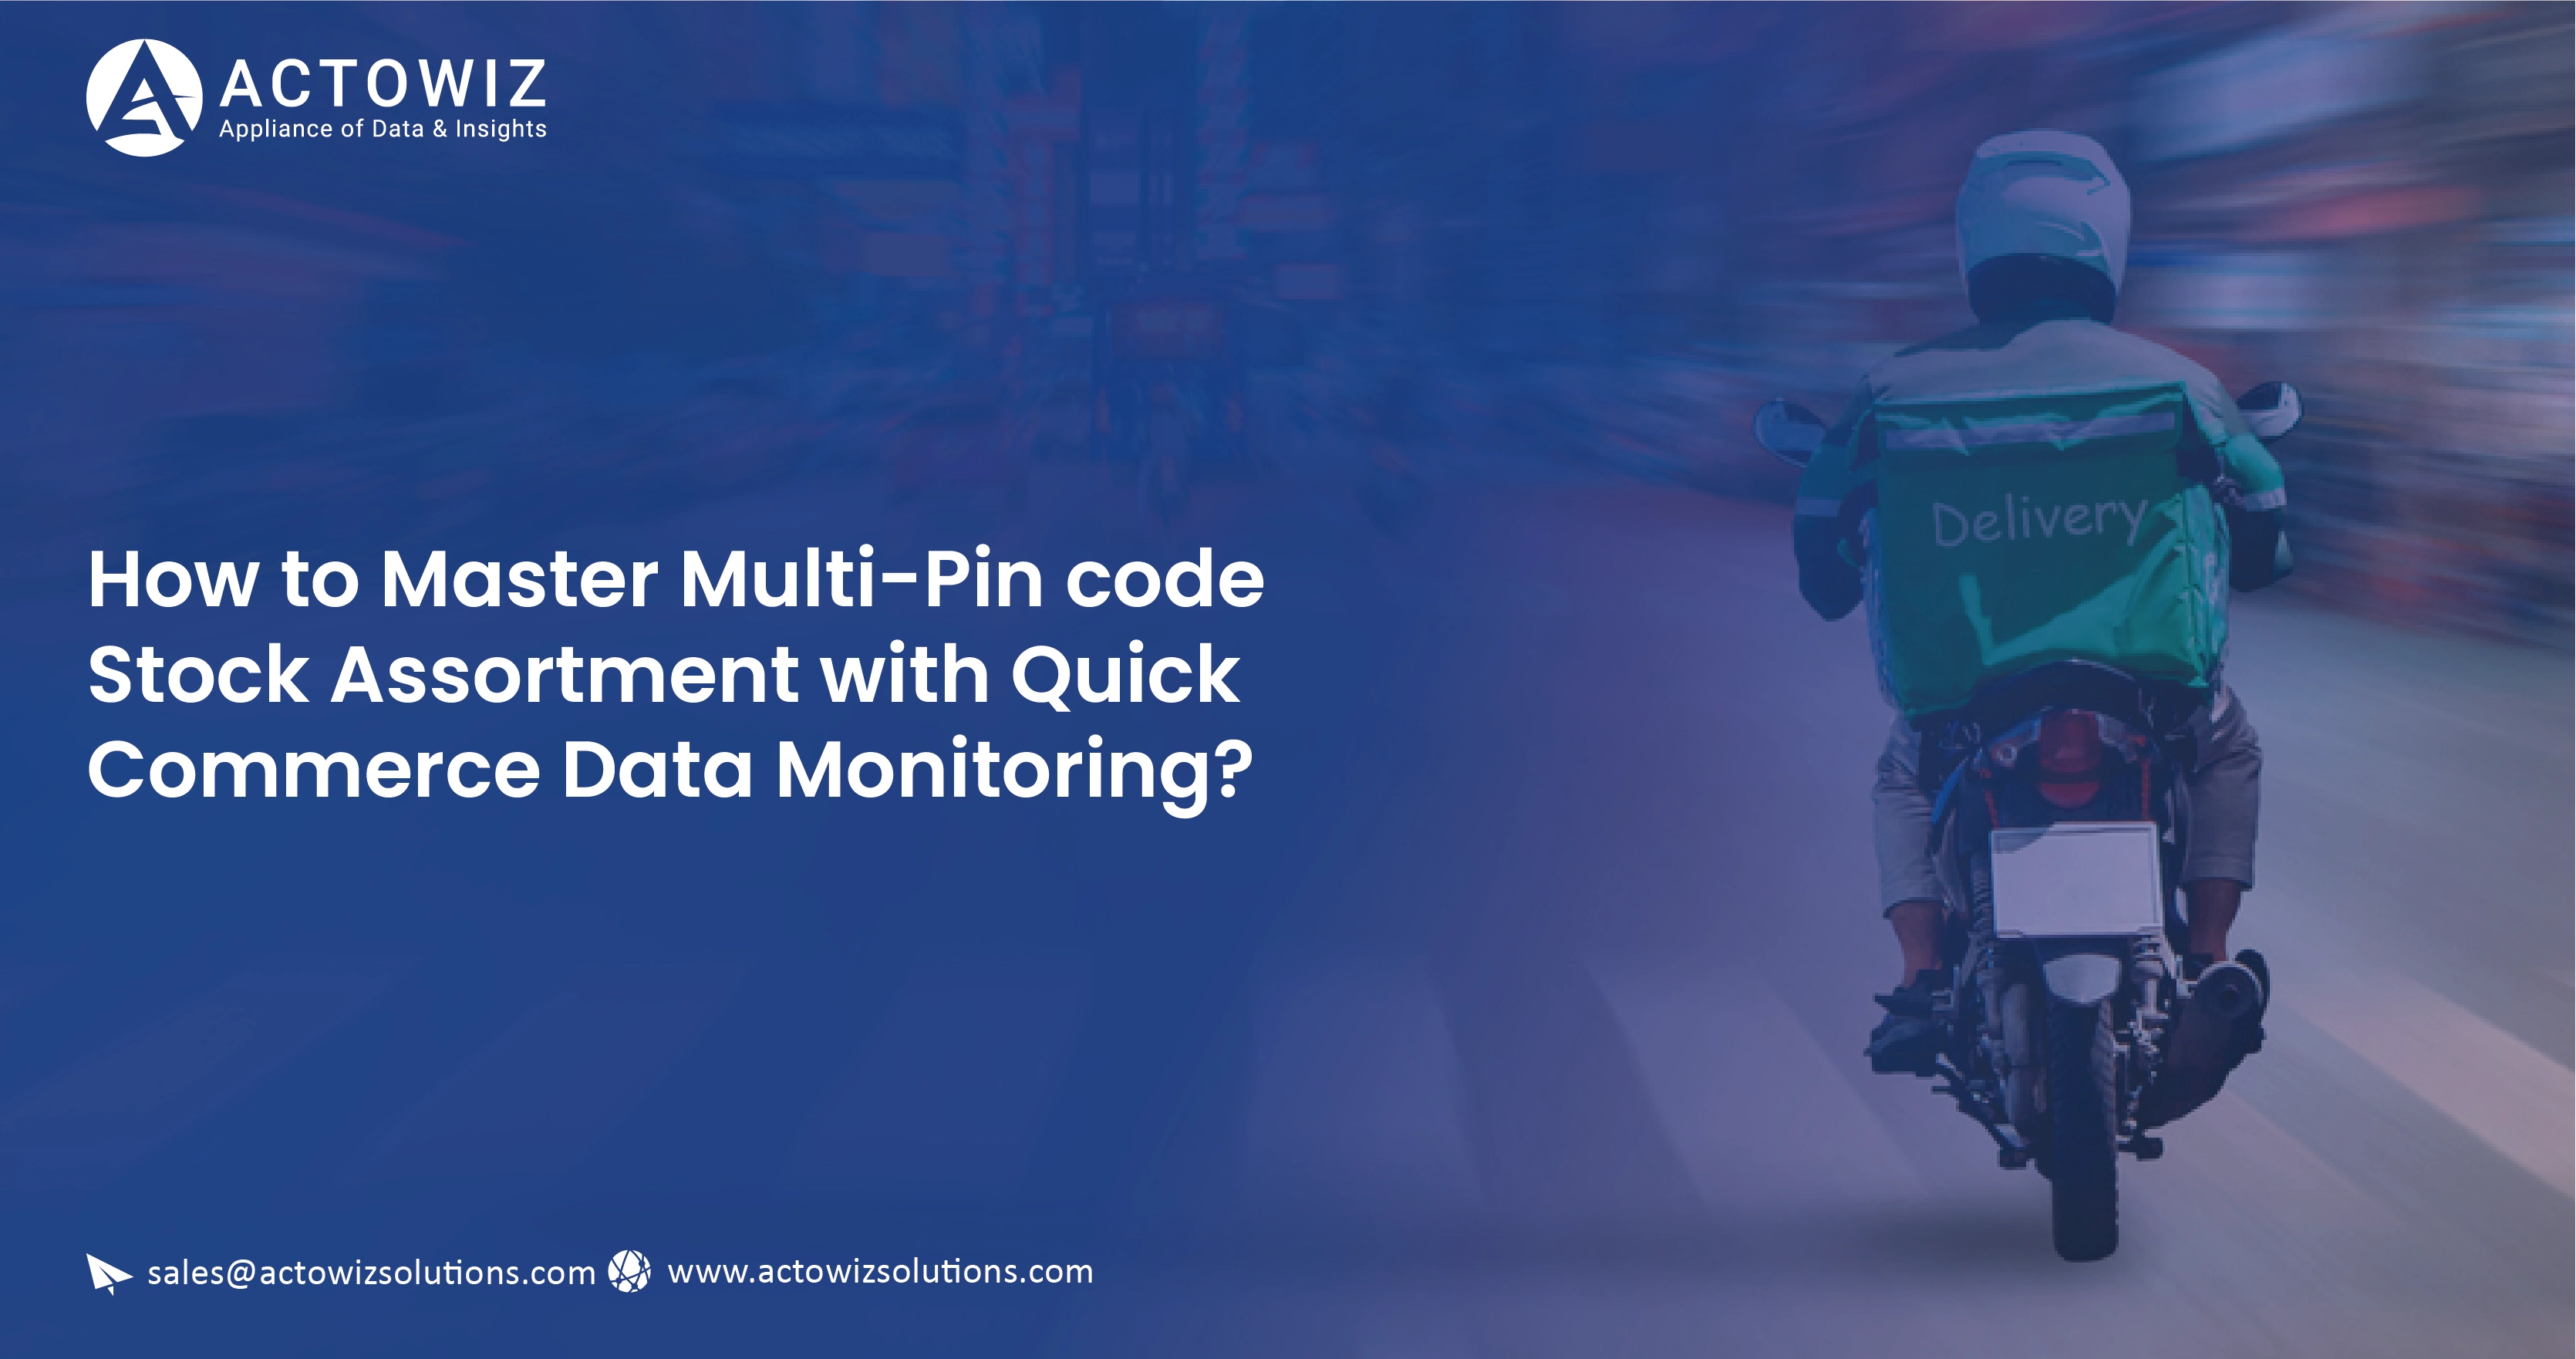 How-to-Master-Multi-Pin-code-Stock-Assortment-with-Quick-Commerce-Data-Monitoring